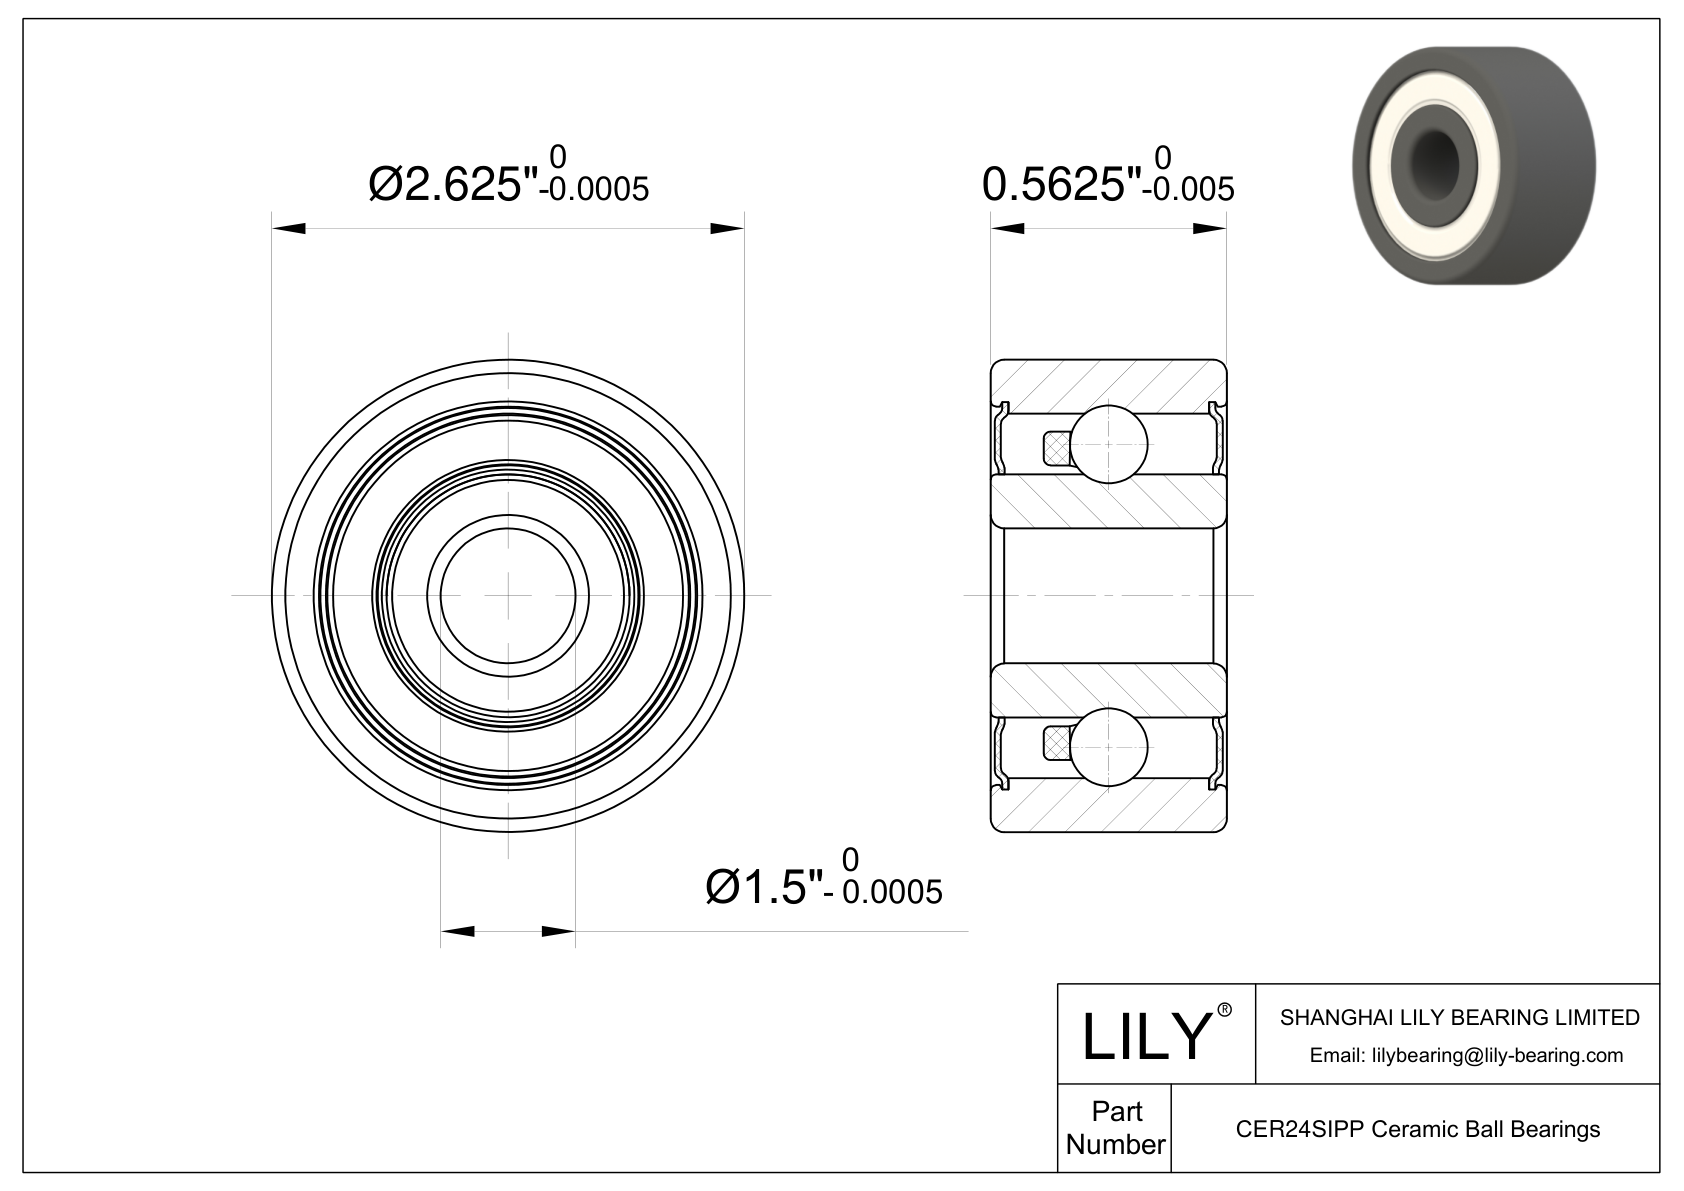 CESI R24 2RS Inch Size Silicon Nitride Ceramic Bearings cad drawing